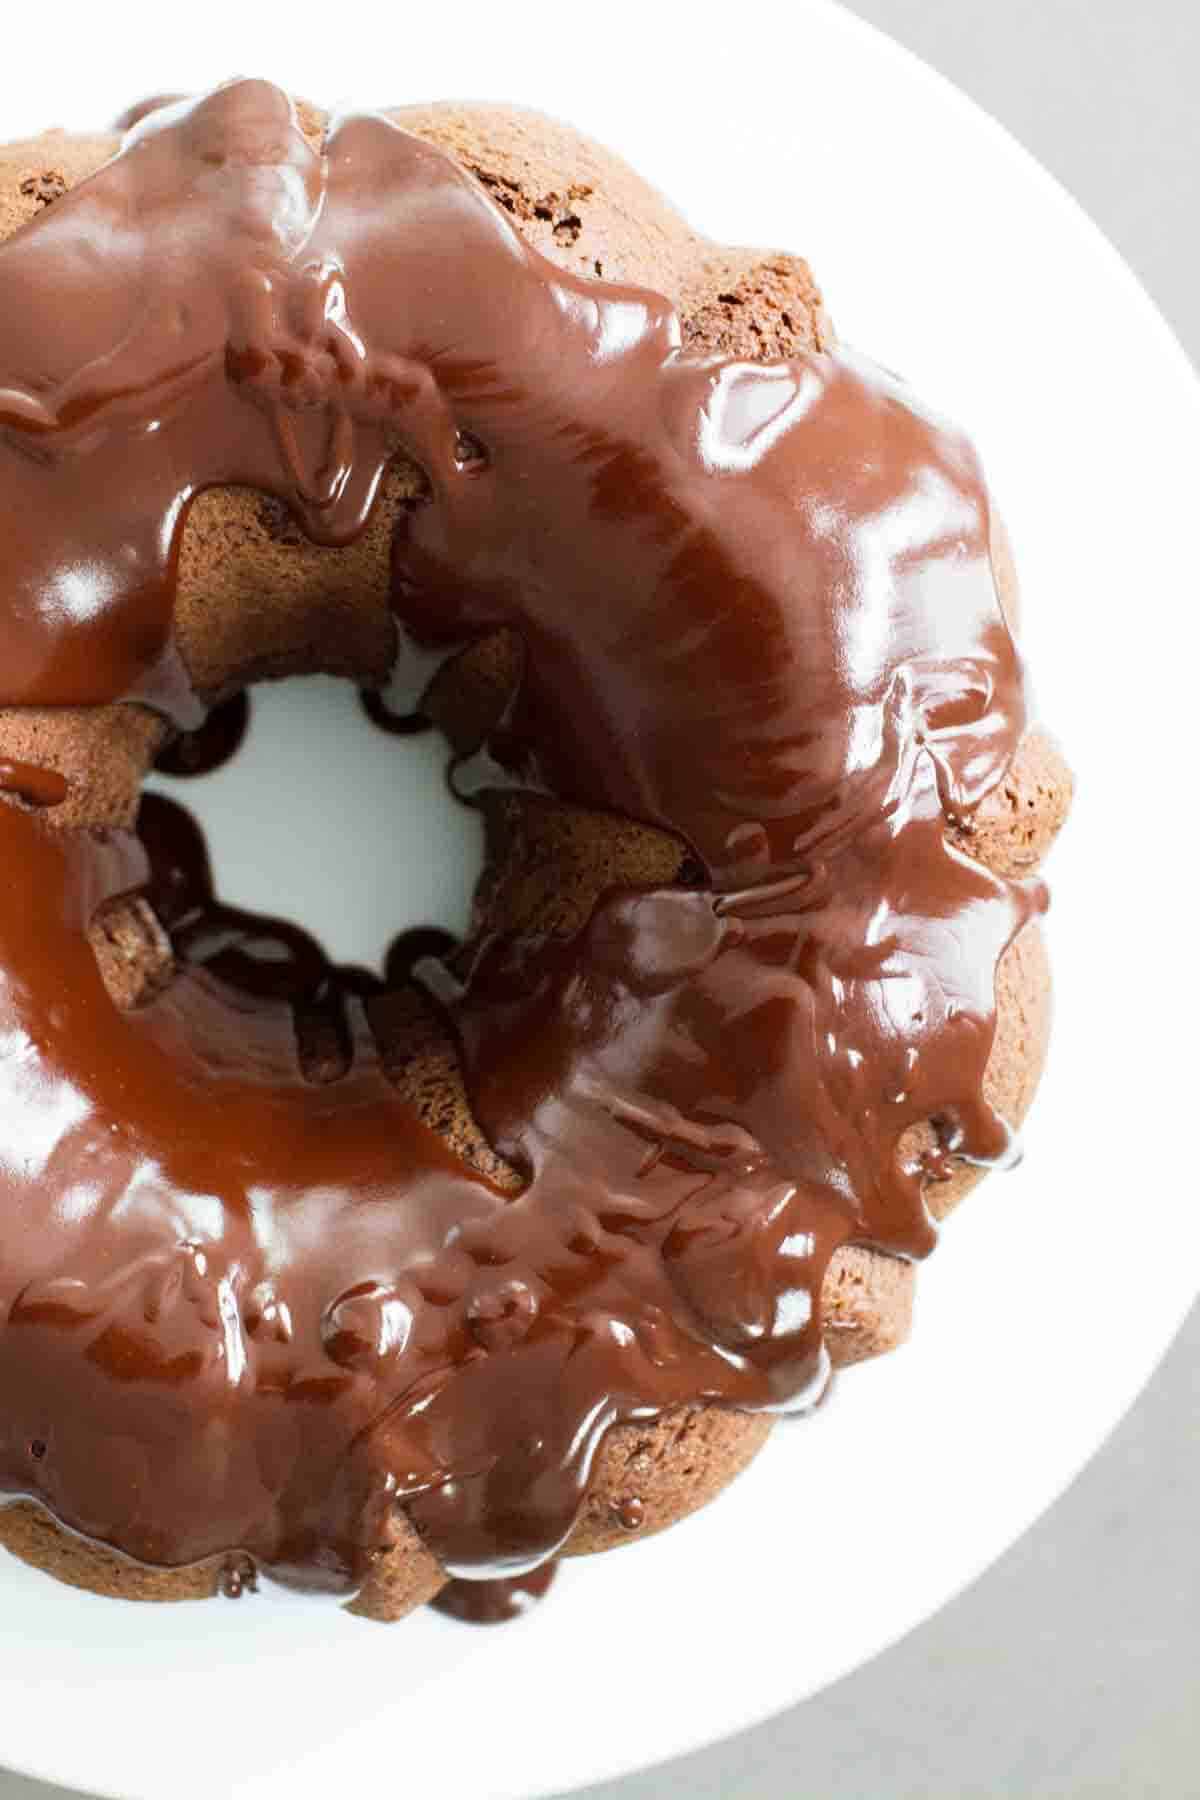 View of shiny chocolate icing over a chocolate bundt cake.